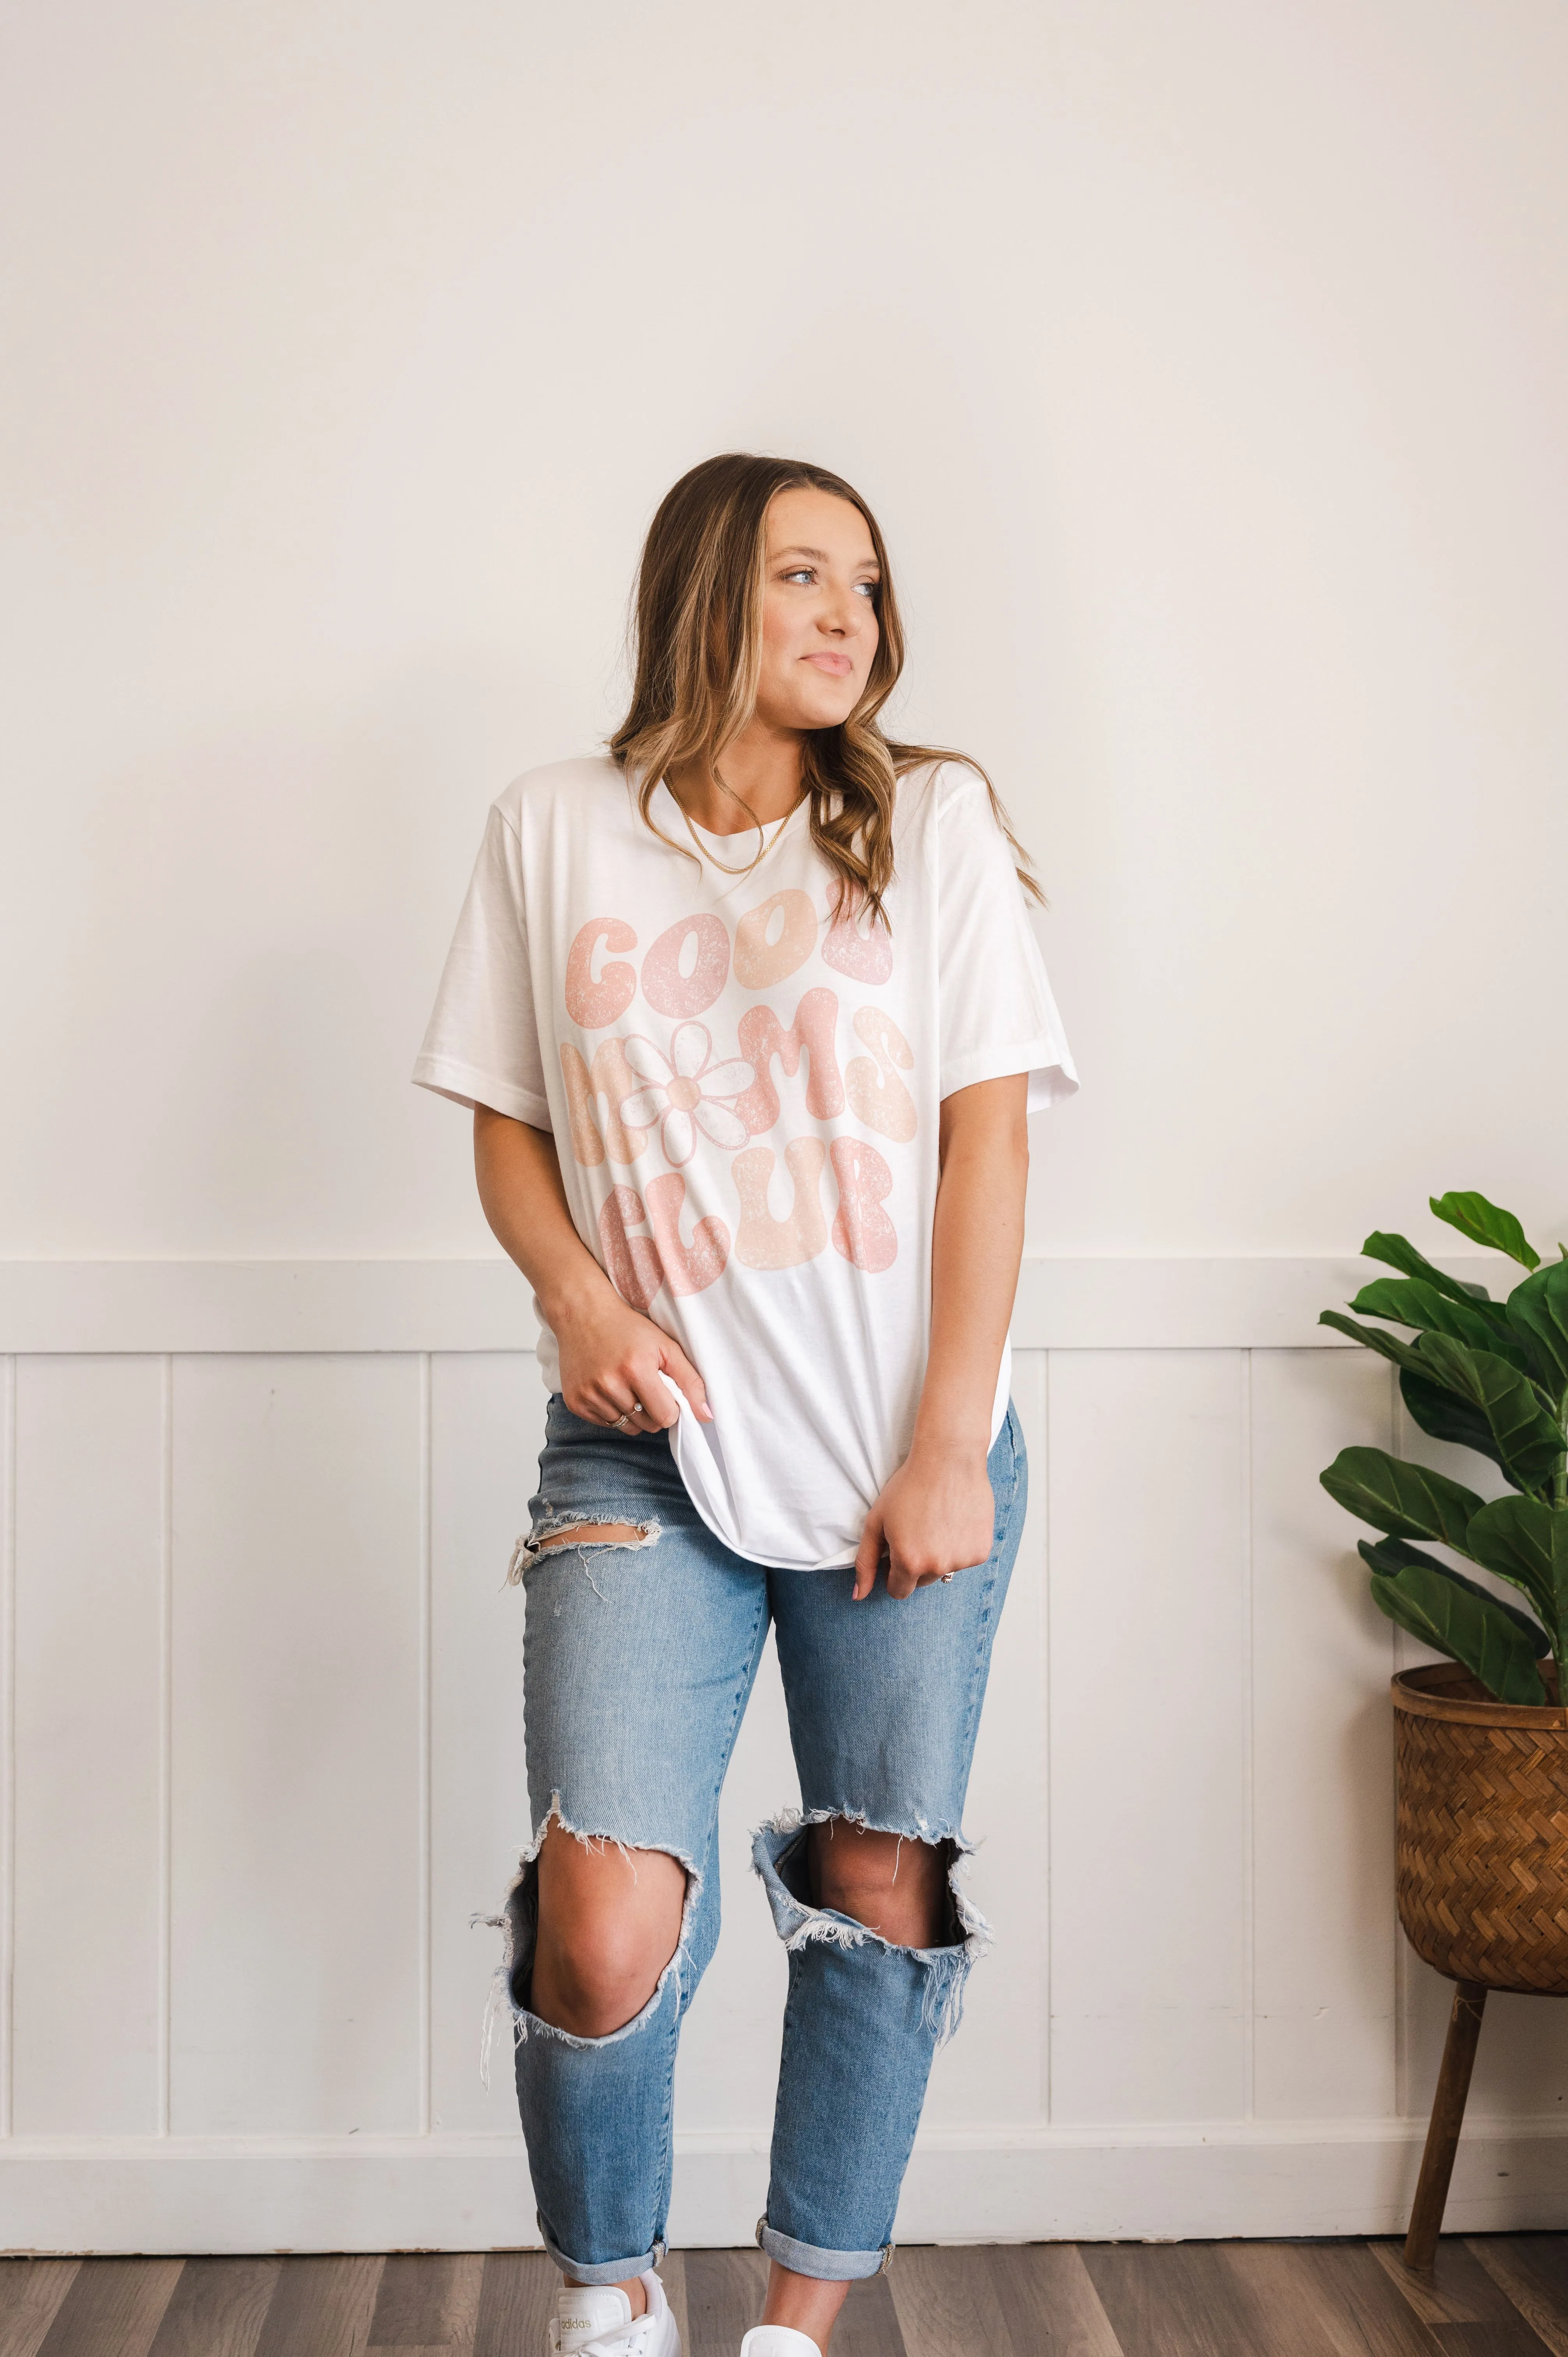 Woman in a white t-shirt with 'Good Vibes Club' print posing in ripped blue jeans, white sneakers, standing beside a potted plant against a white wall.